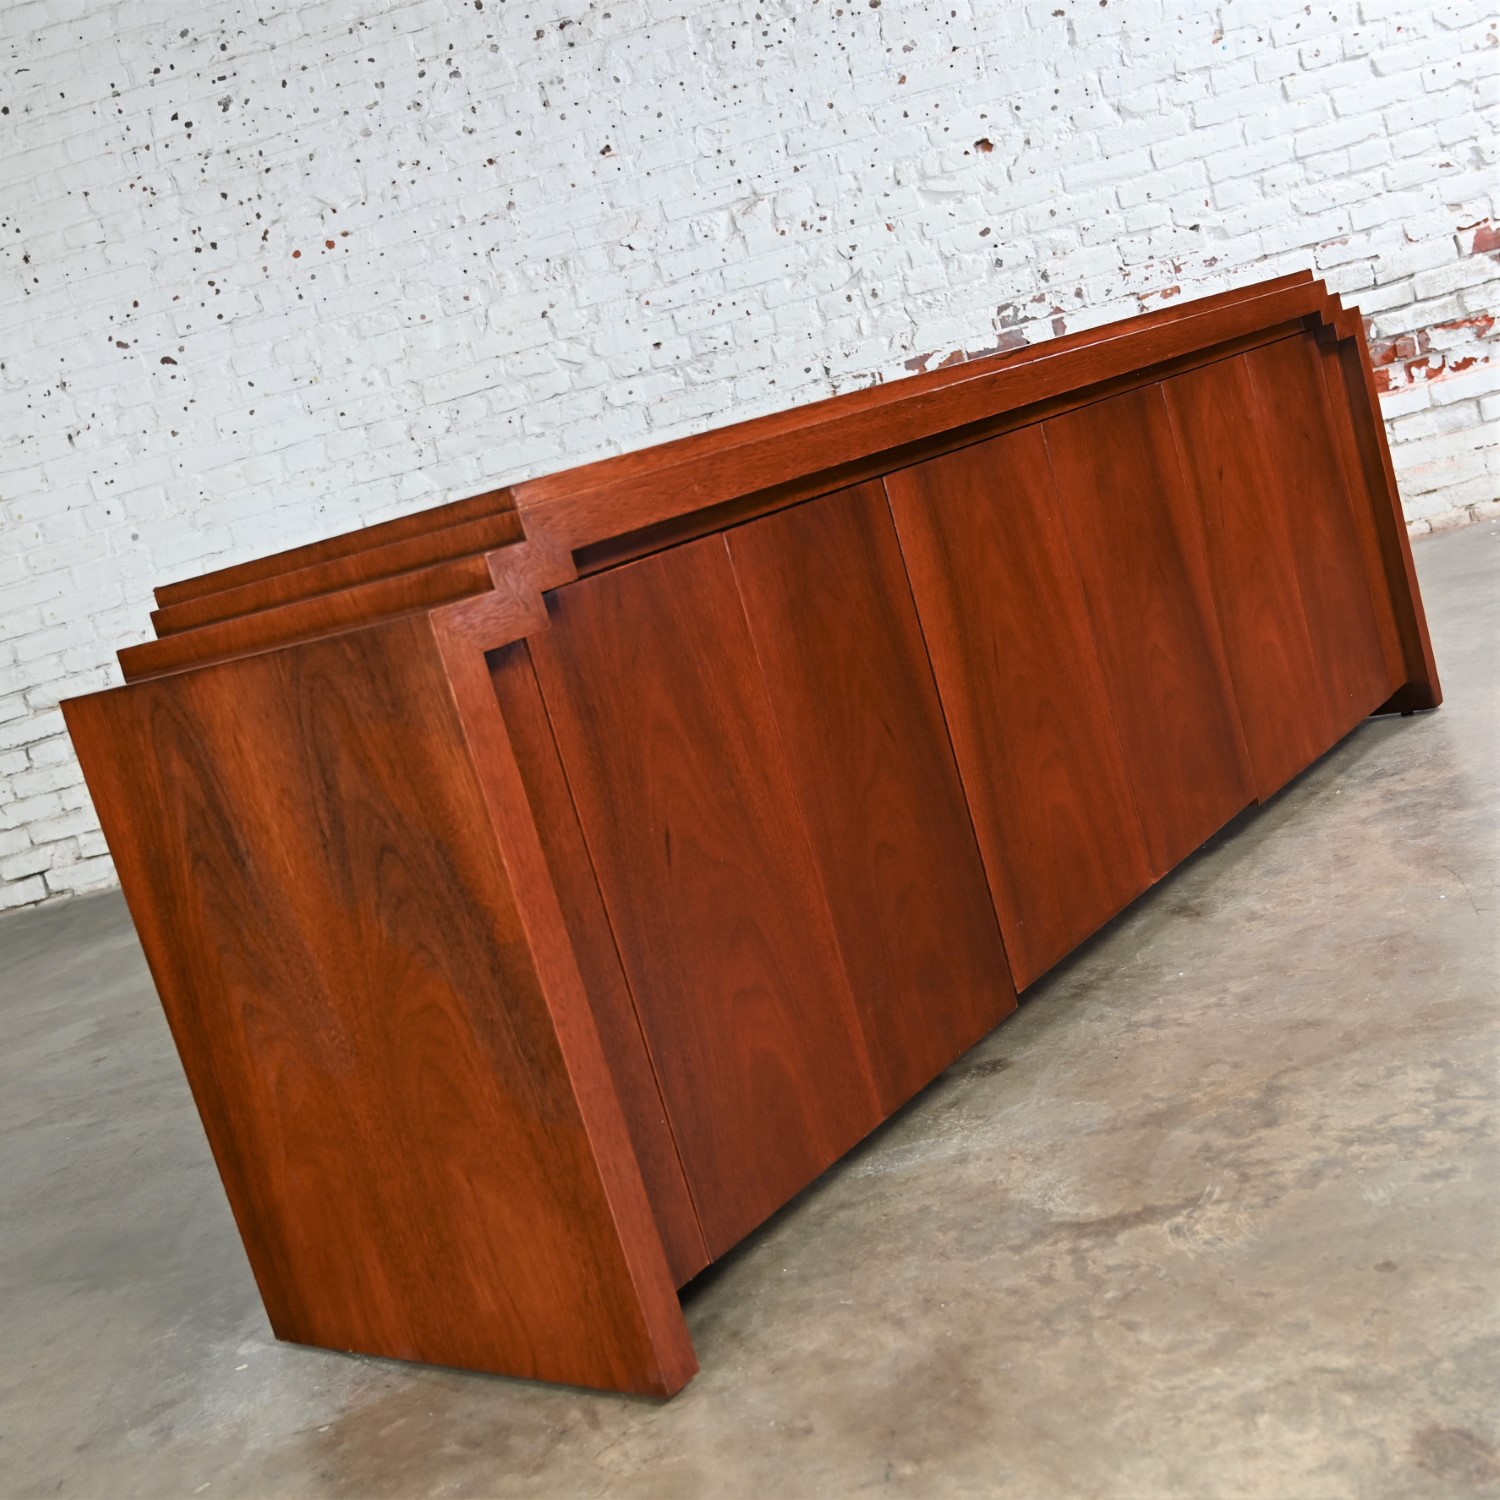 Late 20th Century Art Deco Revival to Postmodern Custom Mahogany Credenza Sideboard Buffet Cabinet